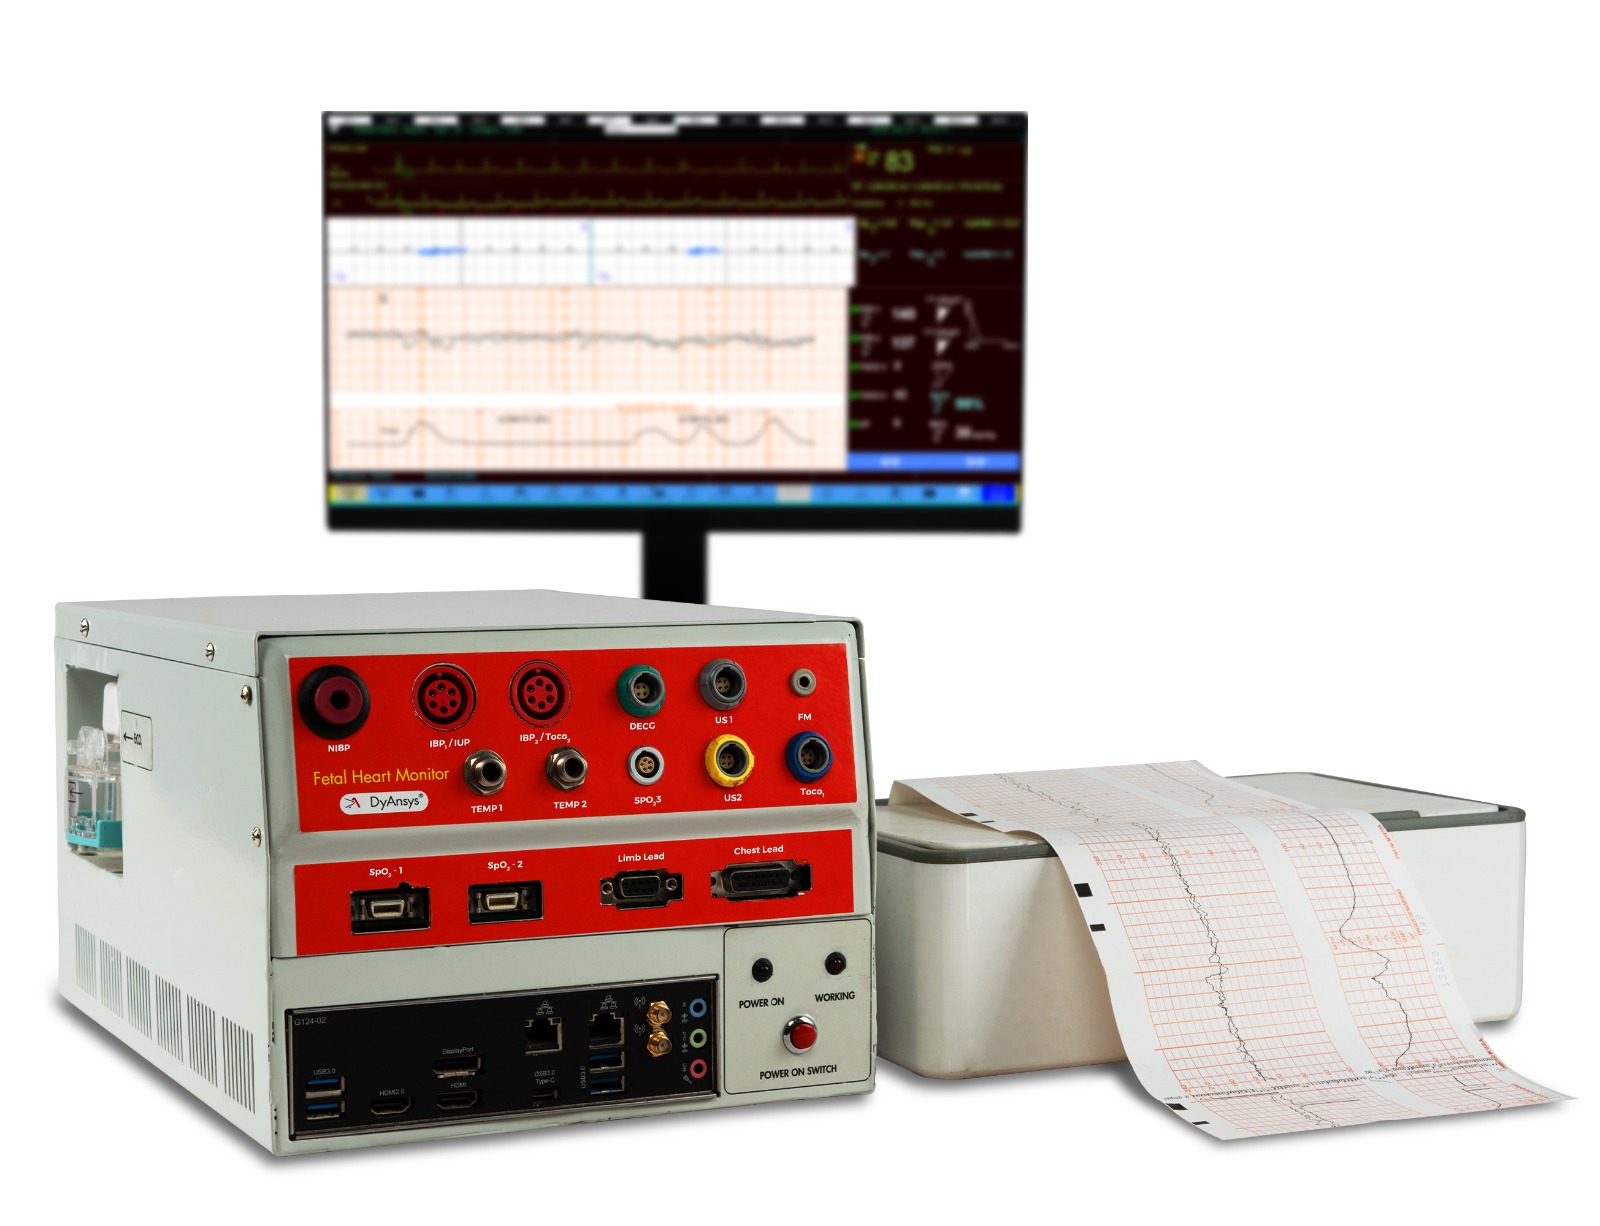 DyAnsys FHM Fetal Heart/Maternal Monitor (not yet available for sale in the US)